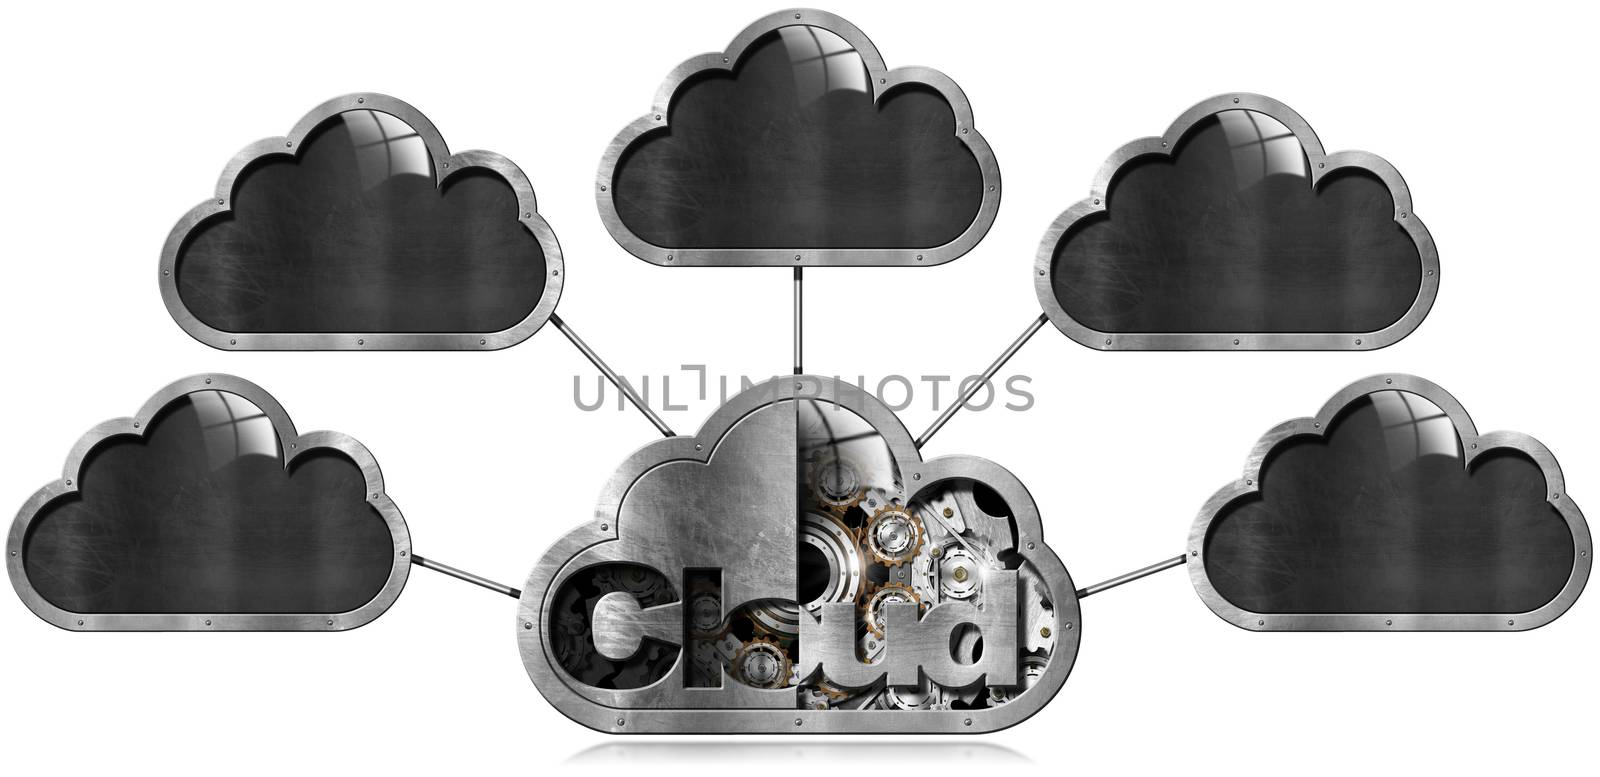 Cloud Computing Concept by catalby